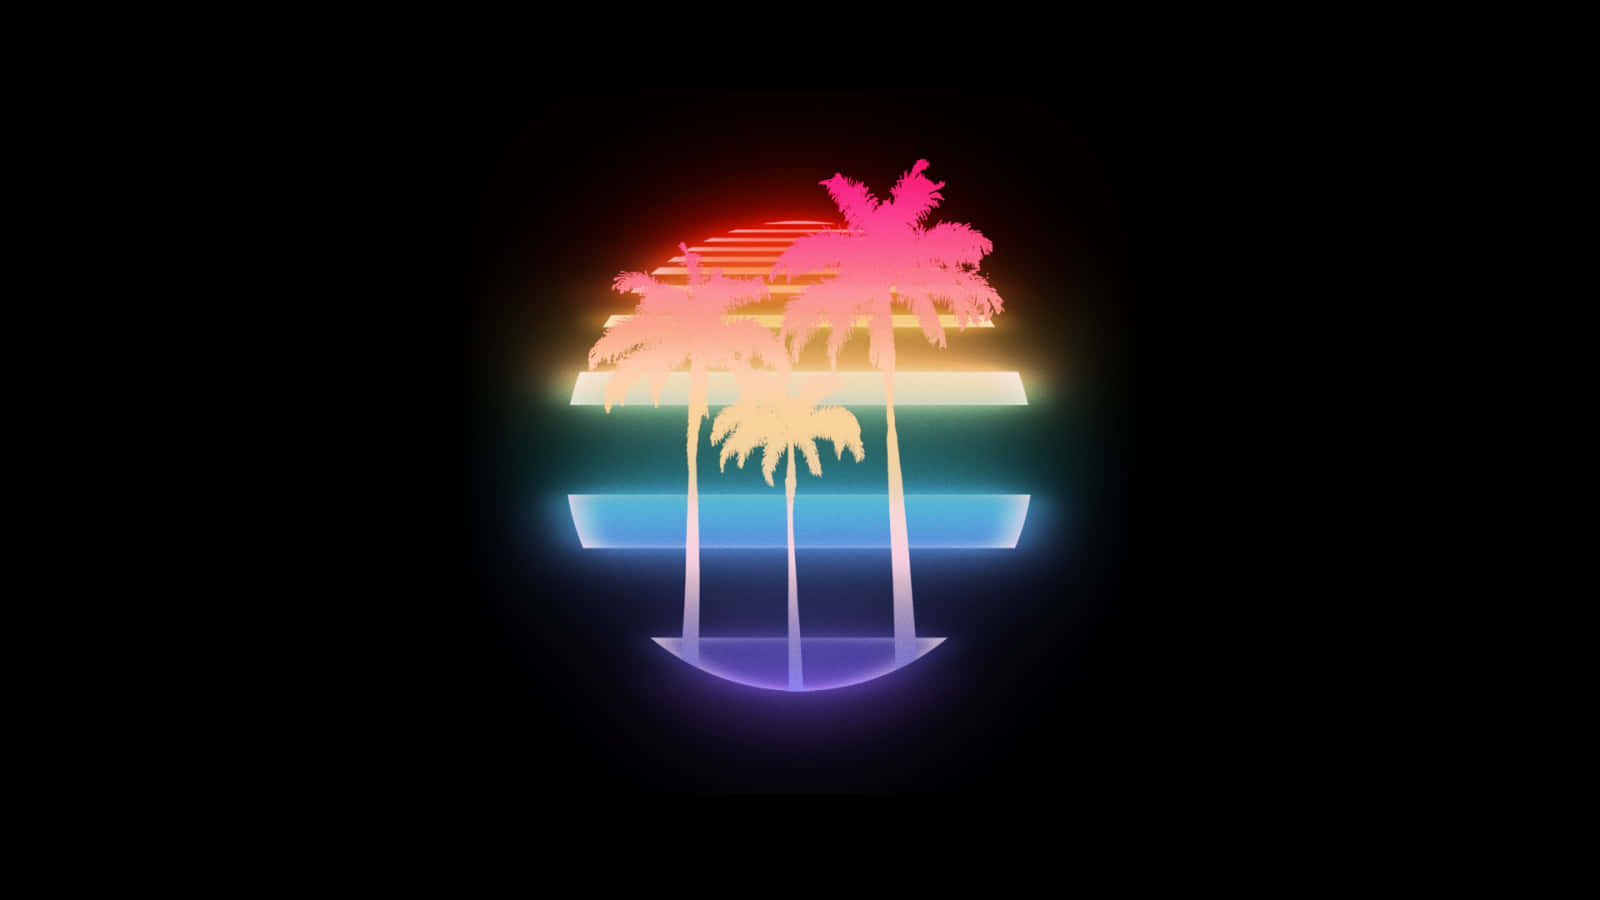 "Chill Out in 80s Vaporwave" Wallpaper